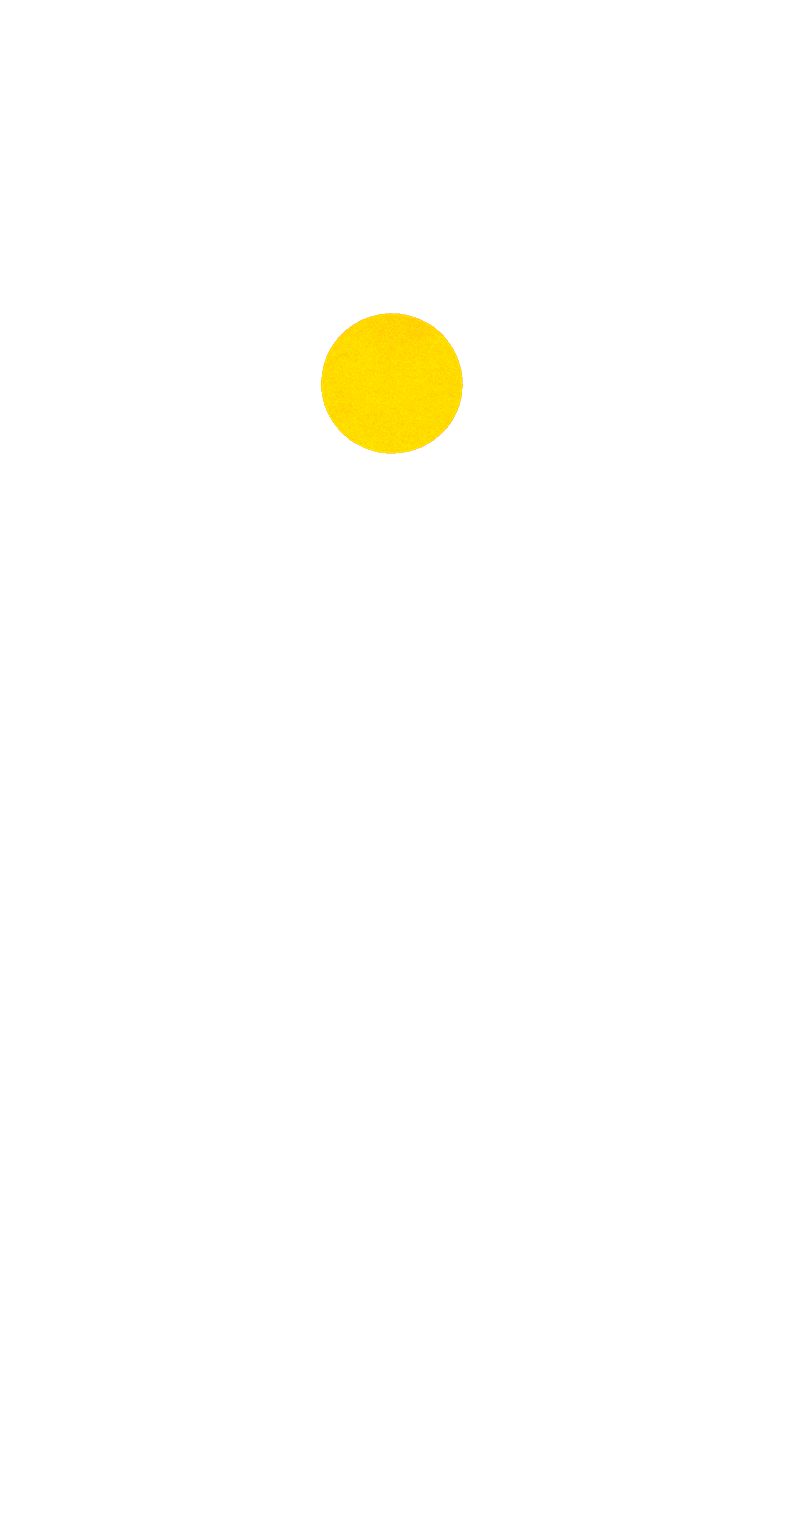 The First Great Train Robbery logo